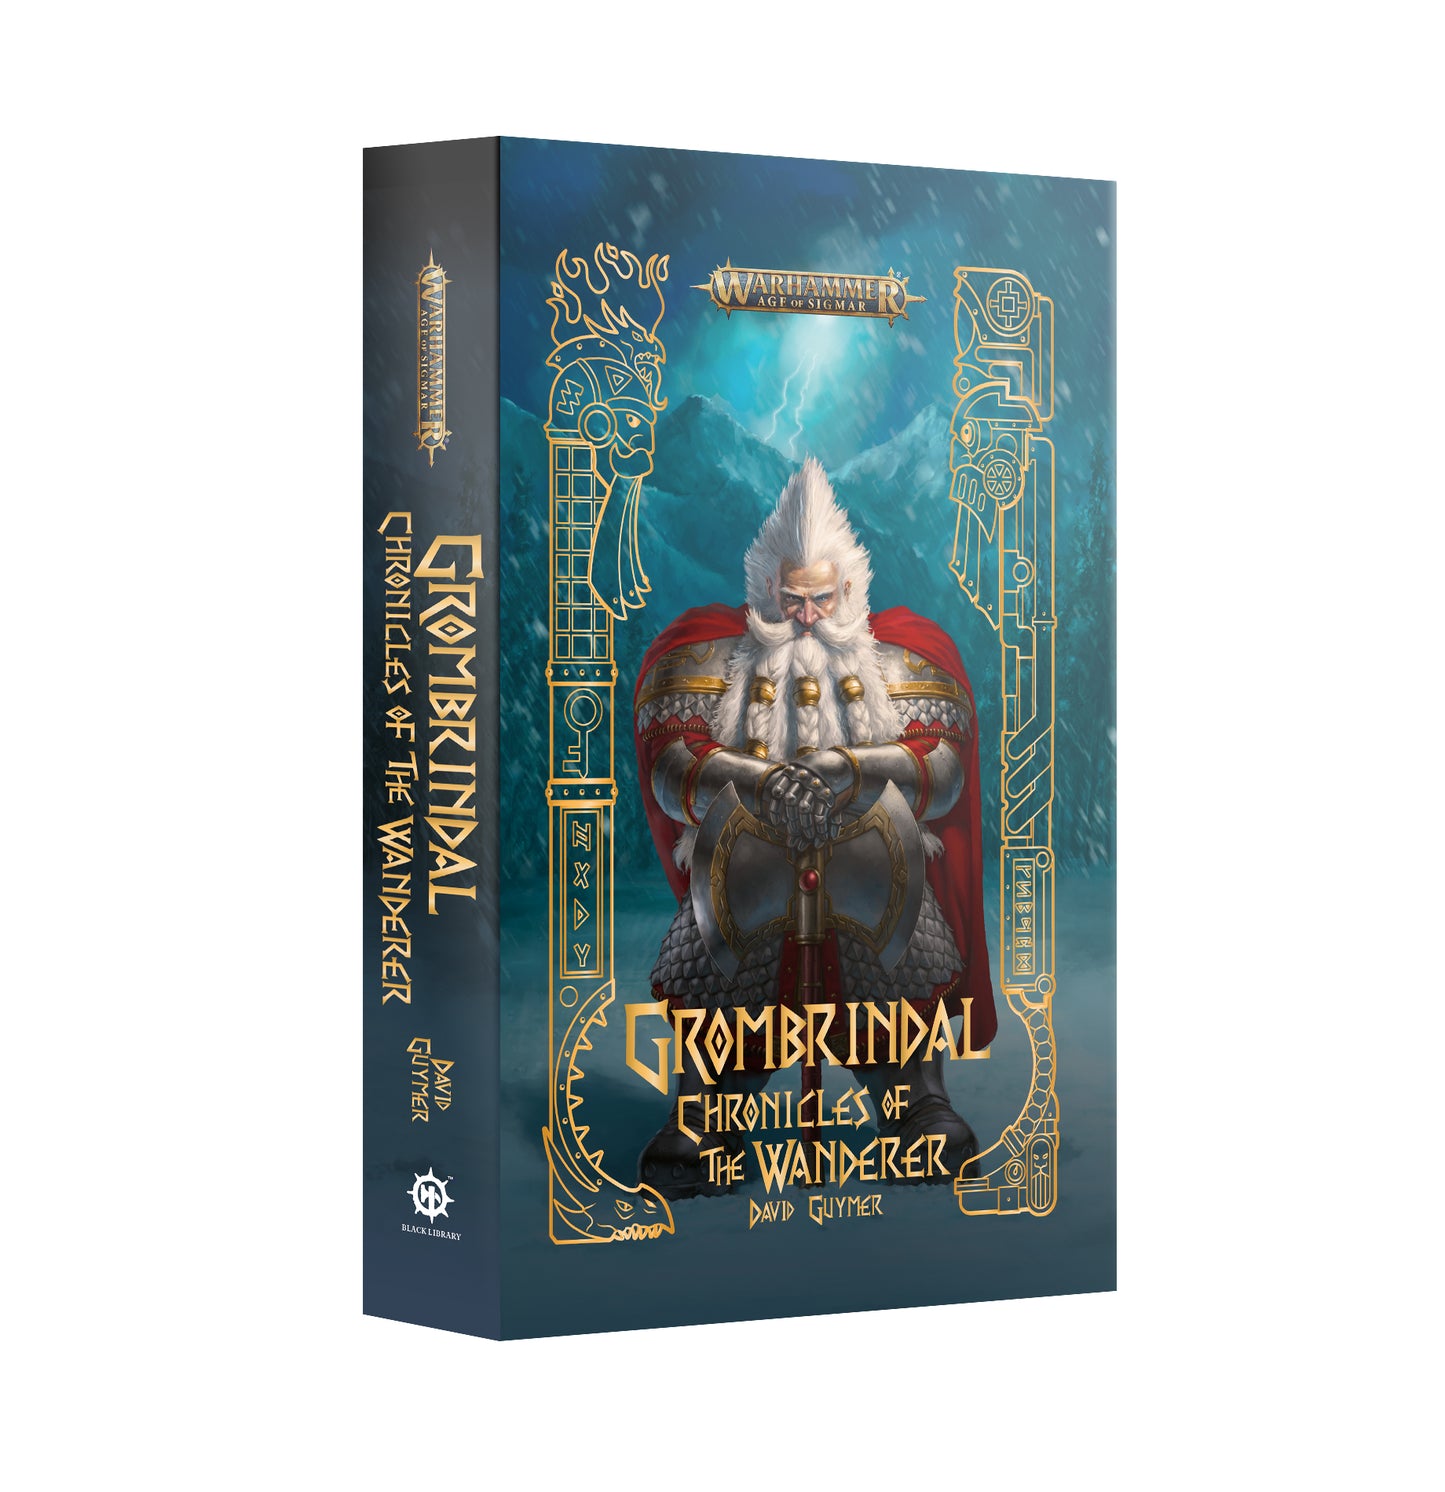 Grombrindal: Chronicles Of The Wanderer